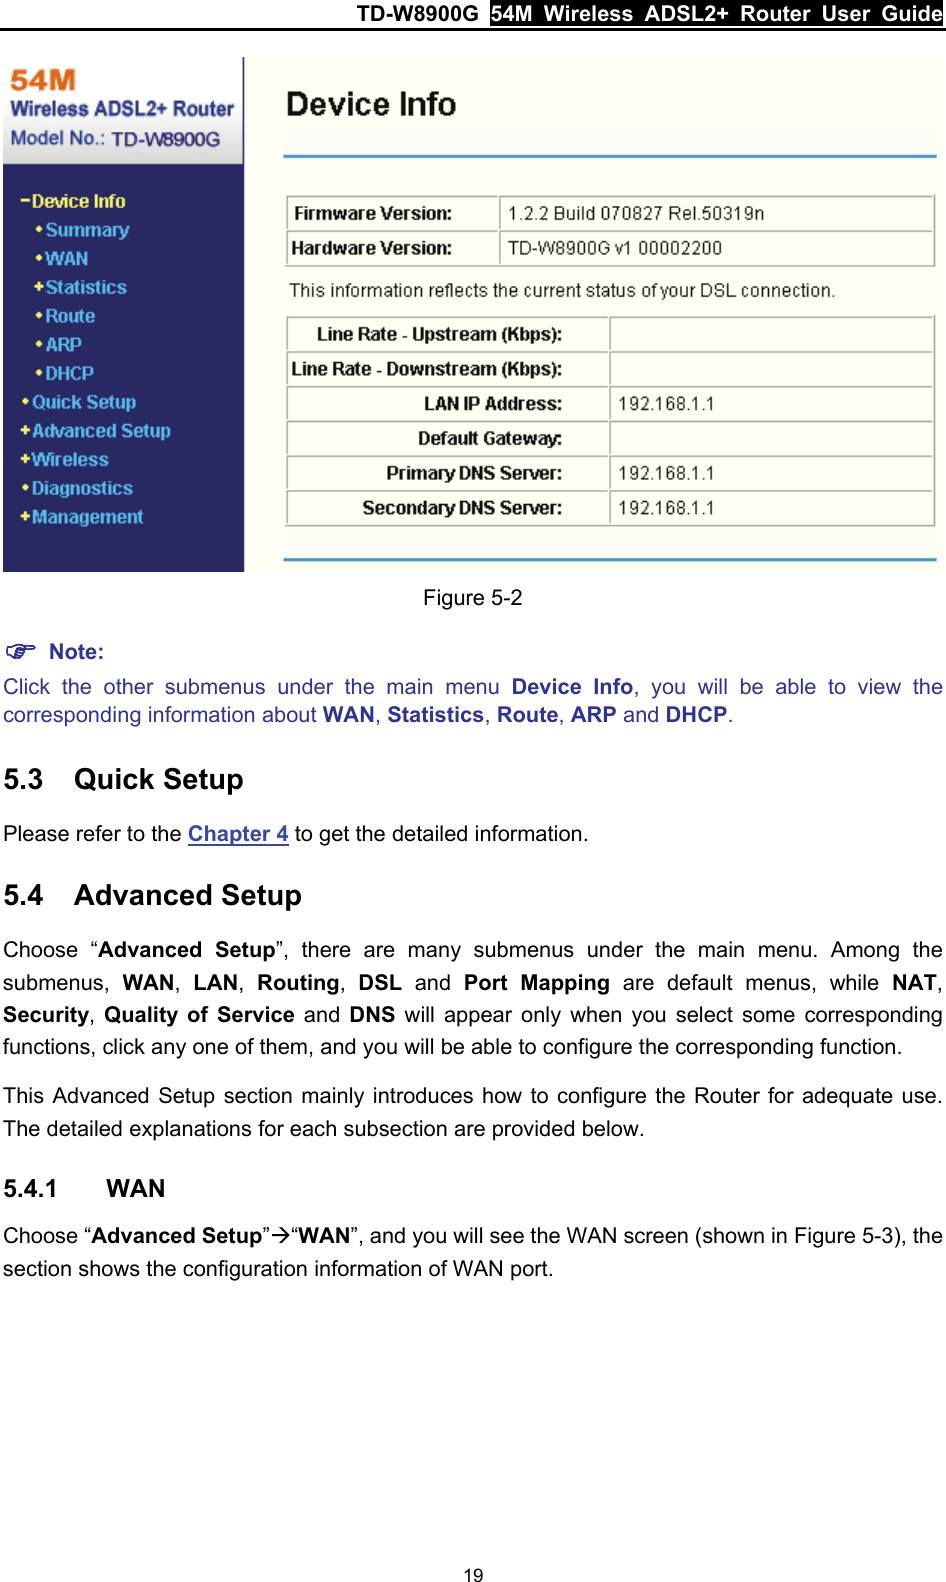 TD-W8900G  54M Wireless ADSL2+ Router User Guide 19  Figure 5-2 ) Note: Click the other submenus under the main menu Device Info, you will be able to view the corresponding information about WAN, Statistics, Route, ARP and DHCP. 5.3  Quick Setup Please refer to the Chapter 4 to get the detailed information. 5.4  Advanced Setup Choose “Advanced Setup”, there are many submenus under the main menu. Among the submenus,  WAN,  LAN,  Routing,  DSL and Port Mapping are default menus, while NAT, Security, Quality of Service and DNS will appear only when you select some corresponding functions, click any one of them, and you will be able to configure the corresponding function. This Advanced Setup section mainly introduces how to configure the Router for adequate use. The detailed explanations for each subsection are provided below. 5.4.1  WAN Choose “Advanced Setup”Æ“WAN”, and you will see the WAN screen (shown in Figure 5-3), the section shows the configuration information of WAN port.   